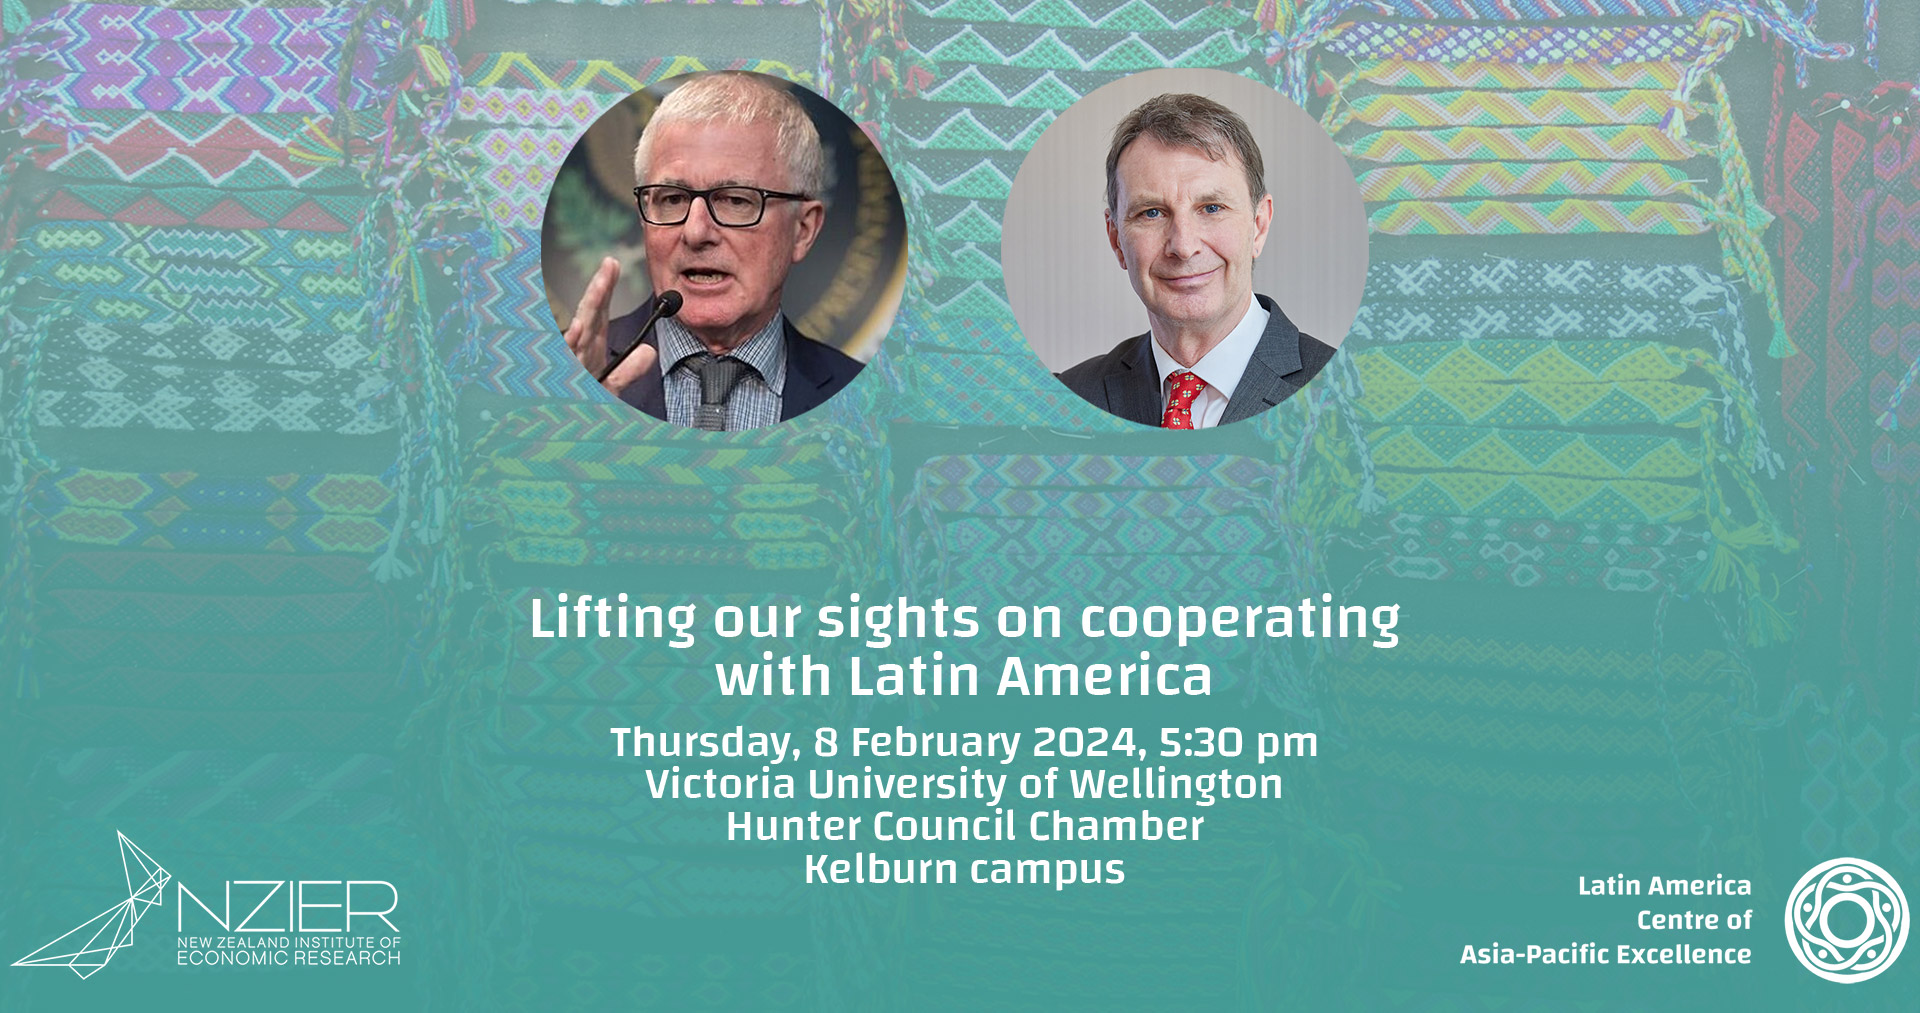 An image promoting the likemindedness research launch featuring speakers Tim Groser and Chris Nixon